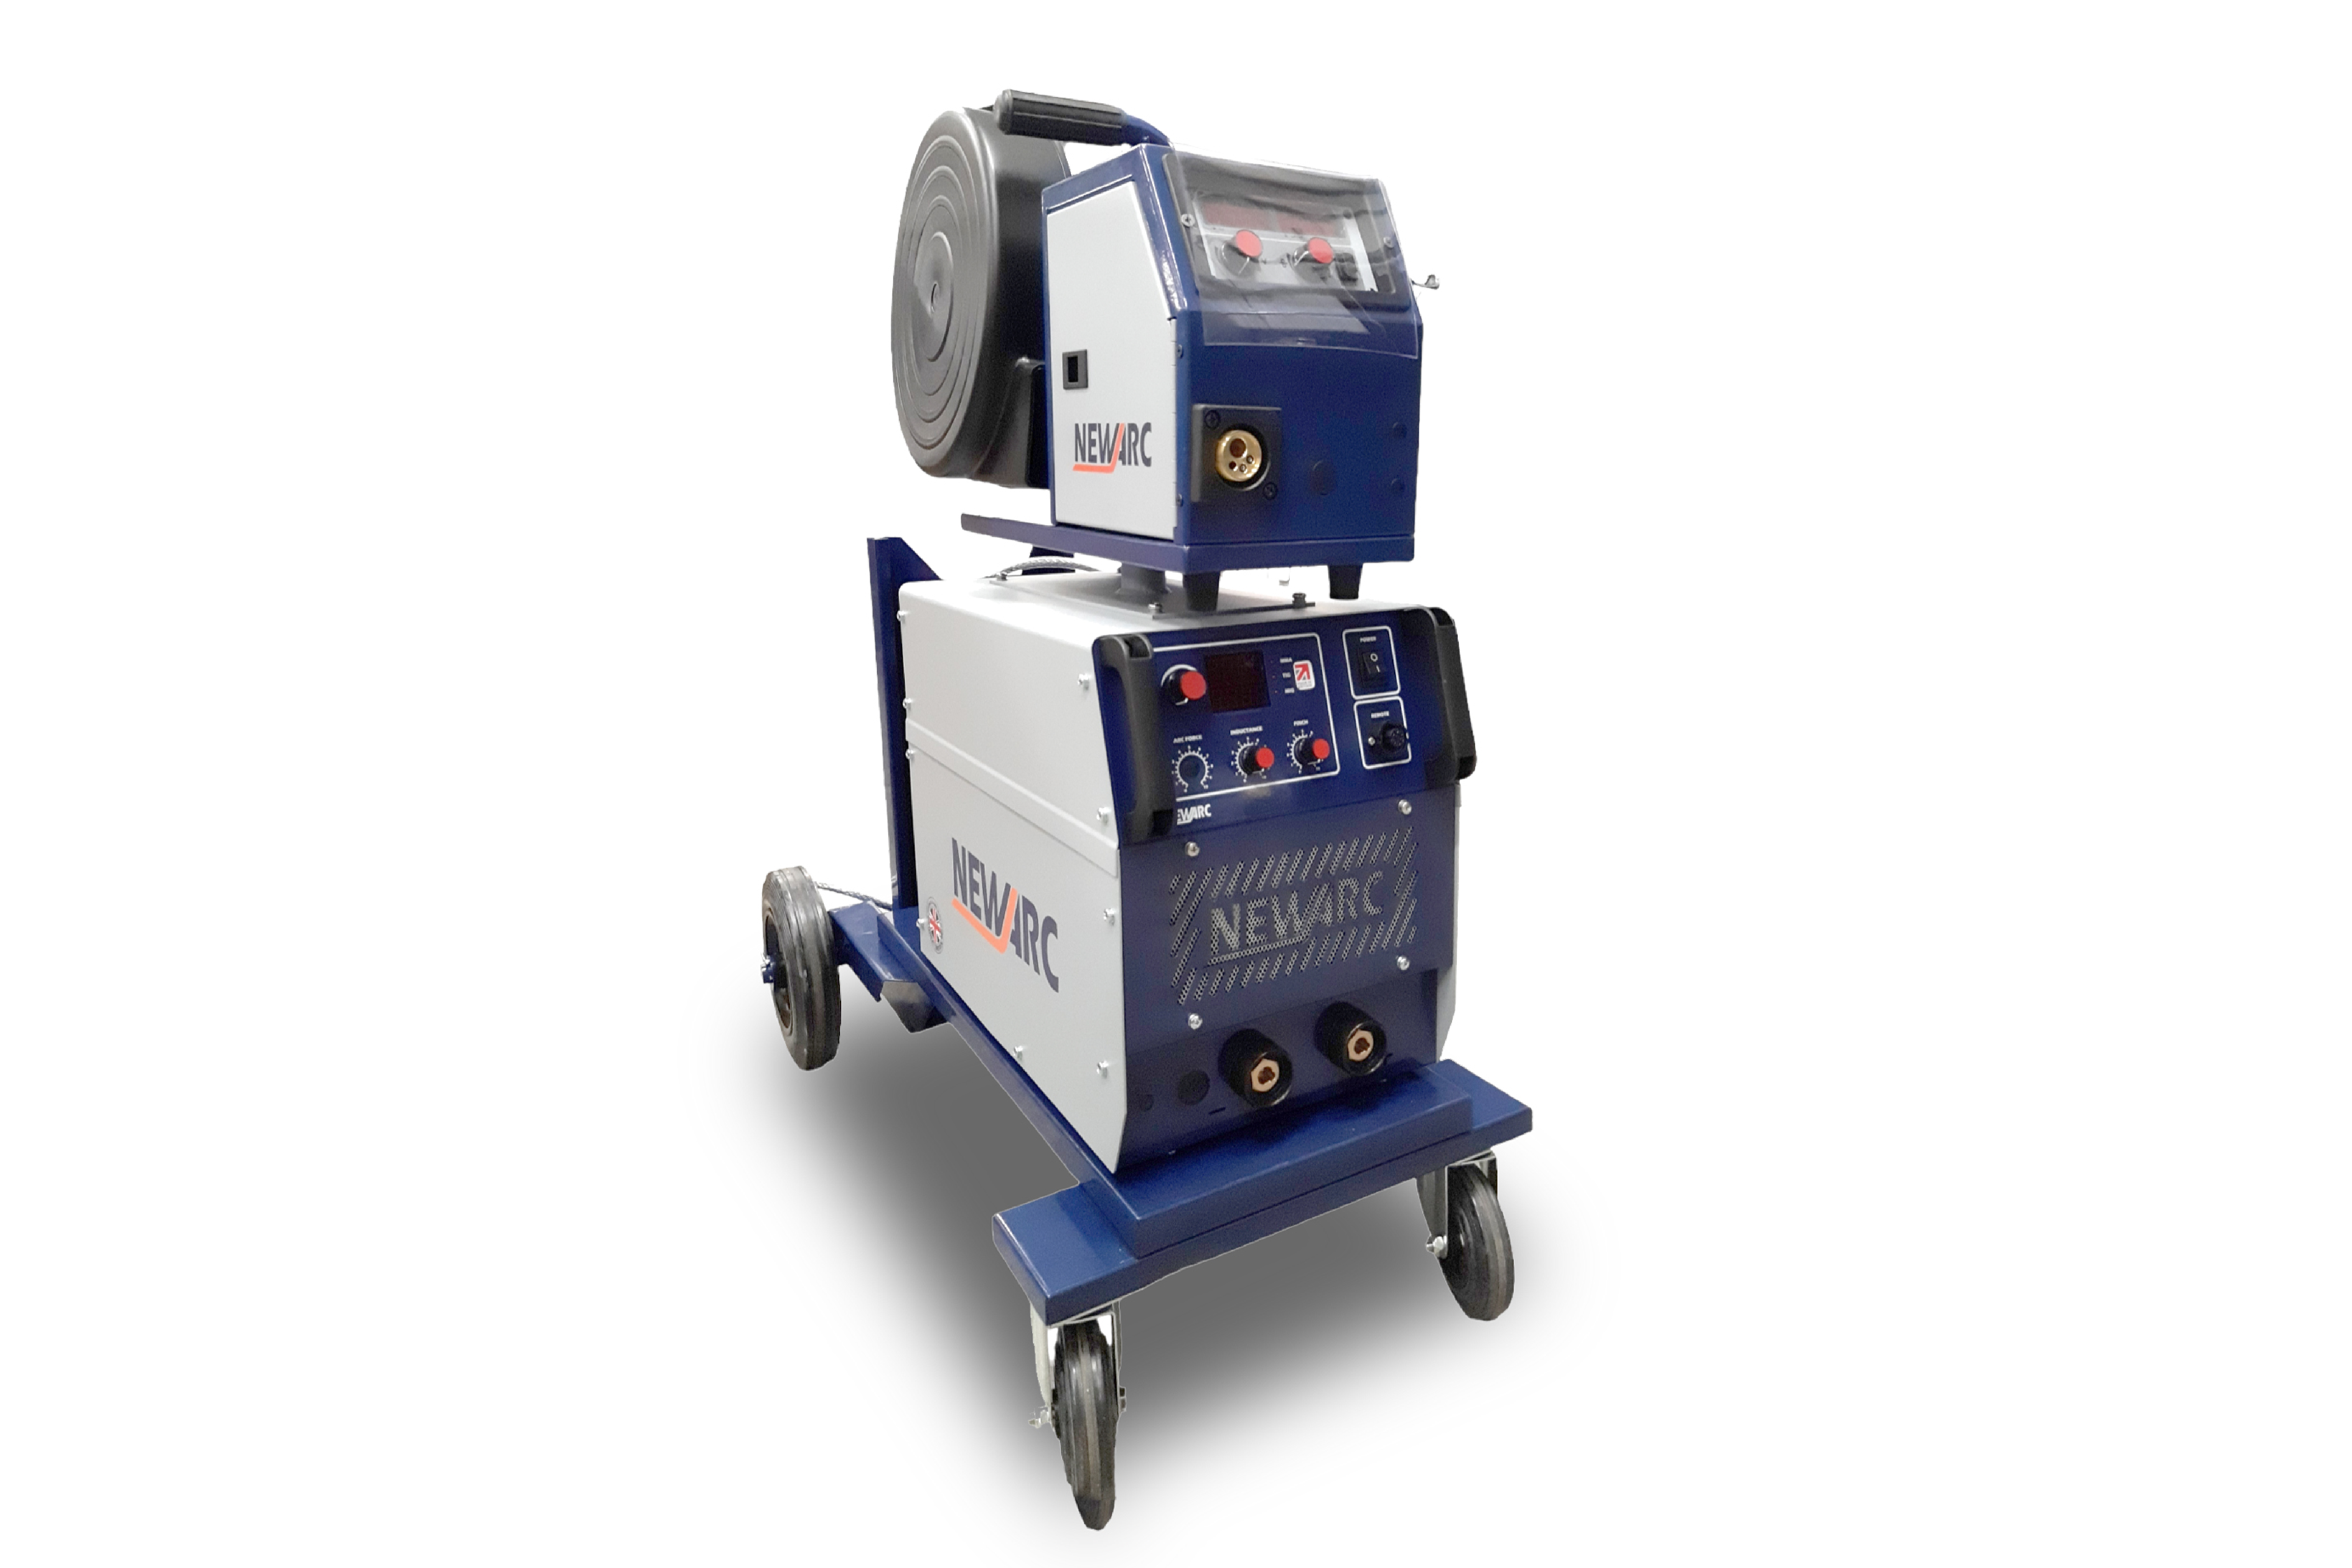 Newarc High Frequency Welding Machines